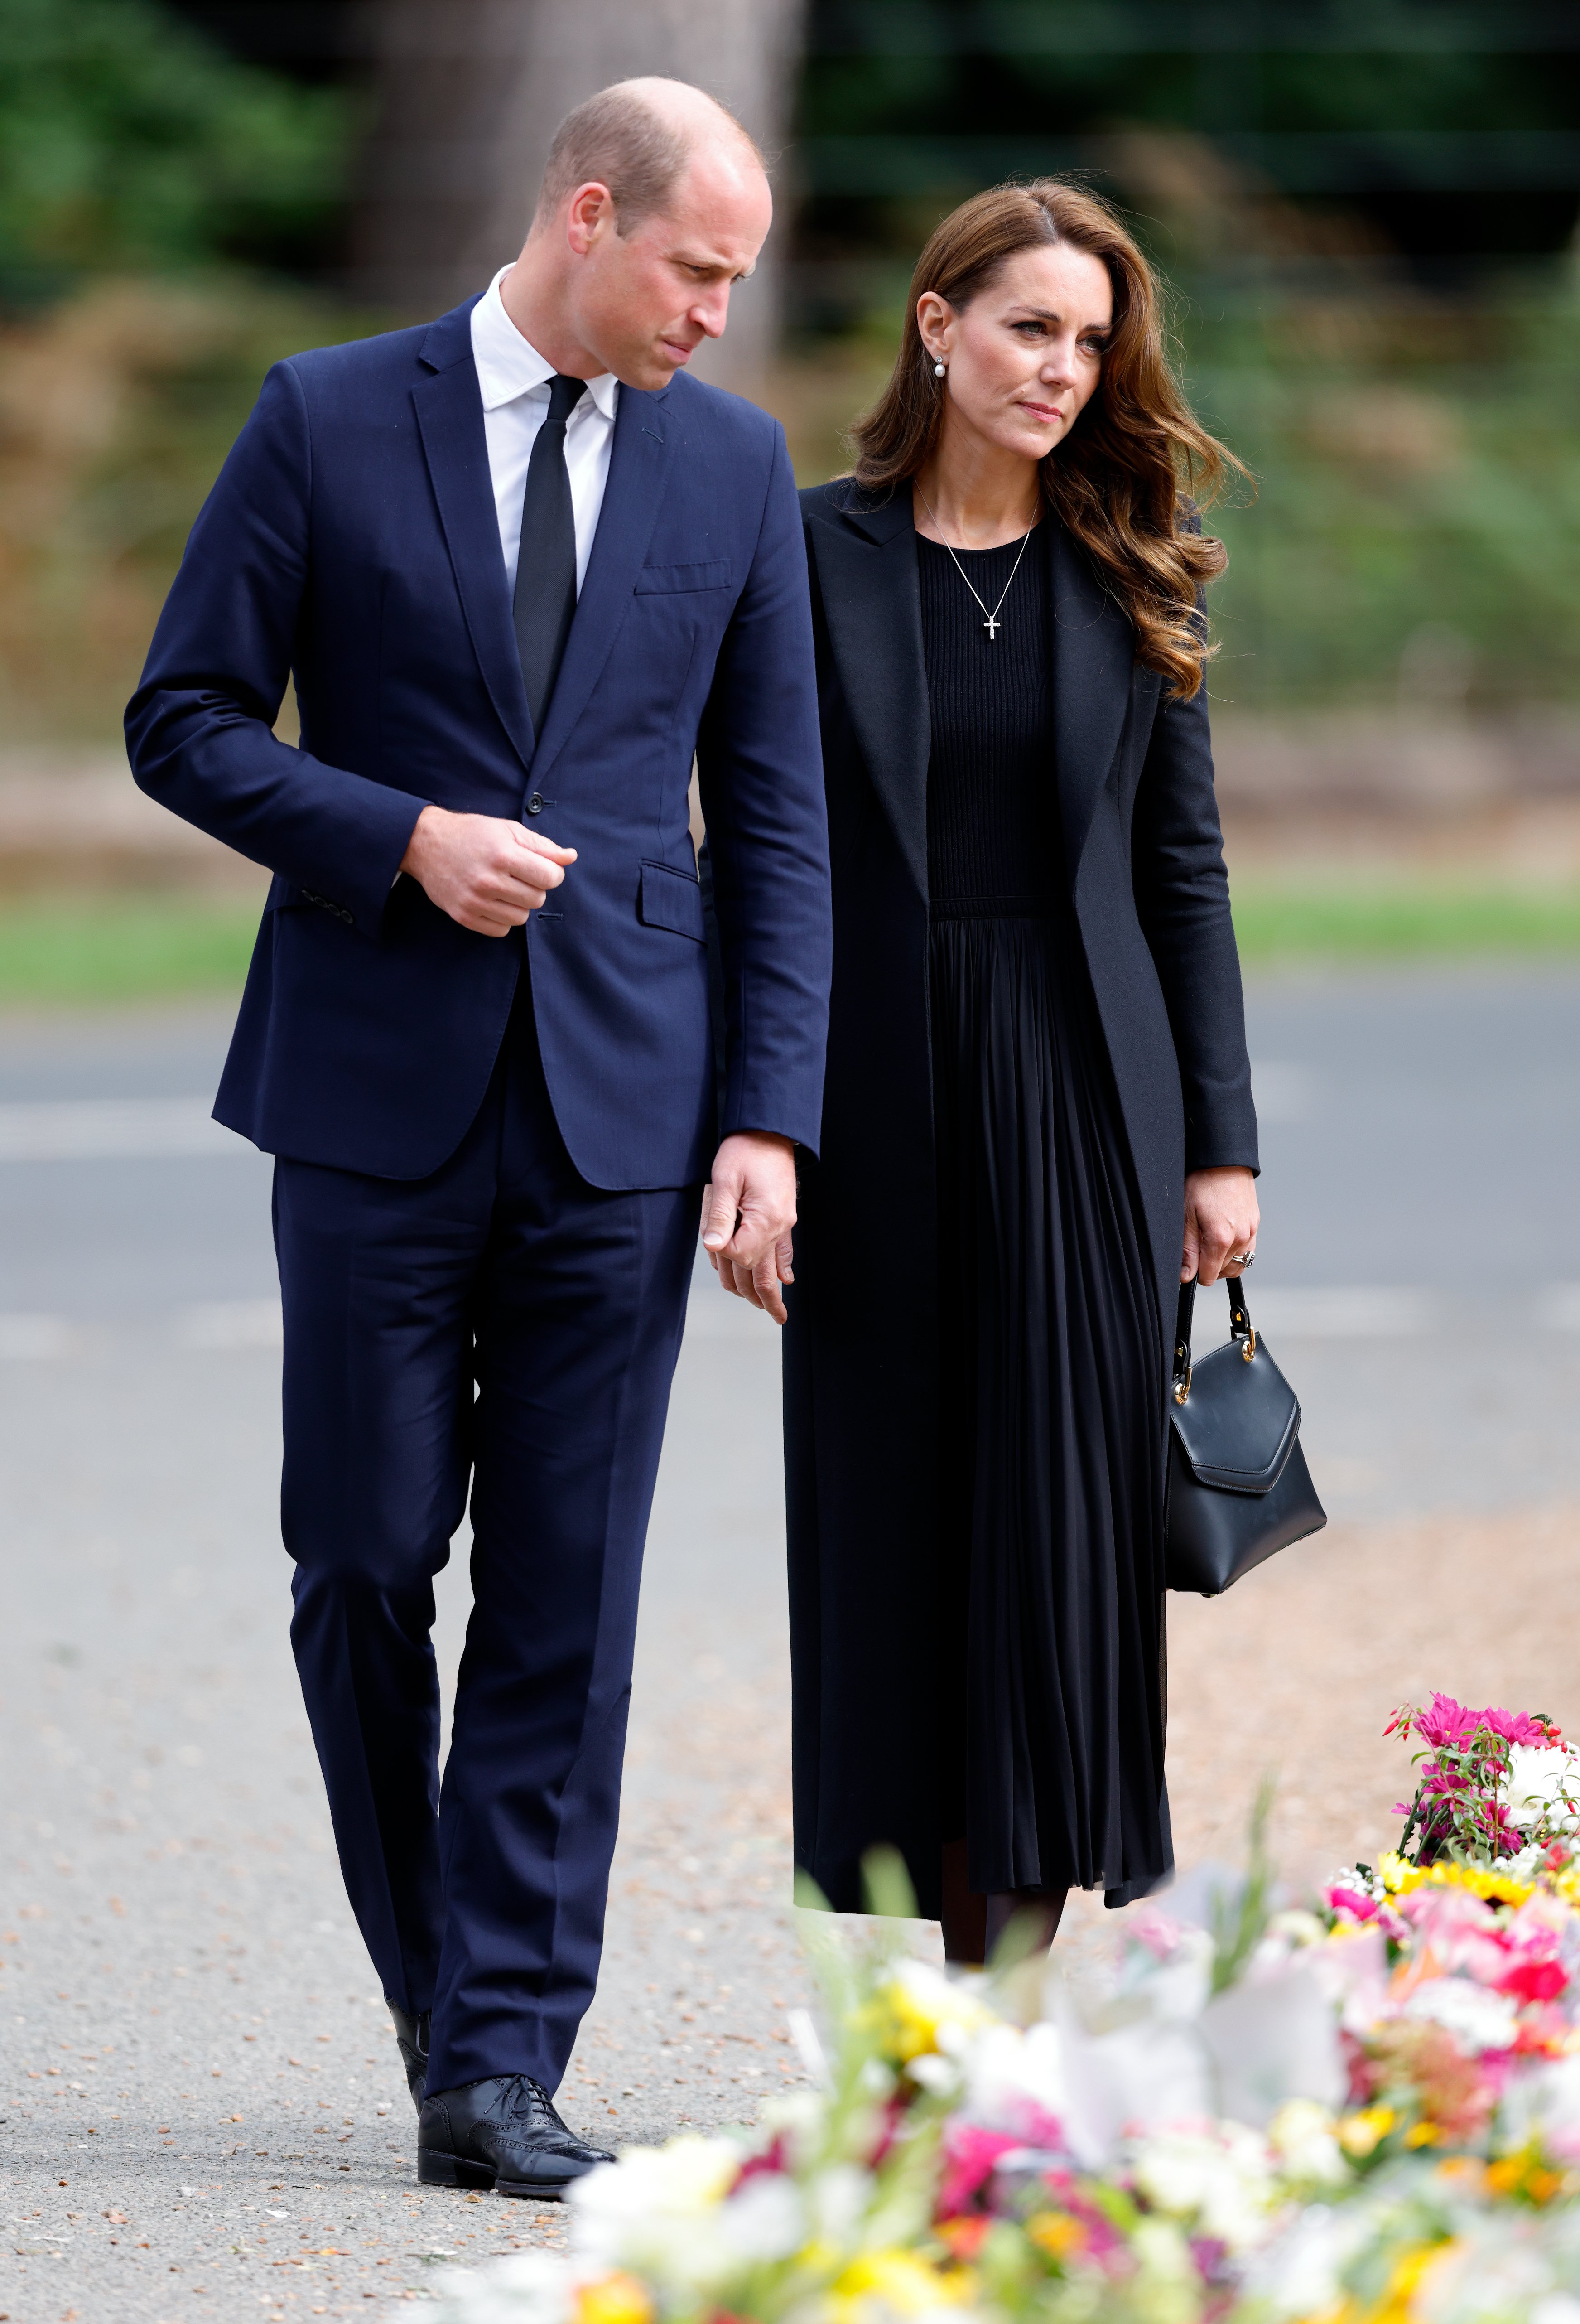 Prince William and Kate Middleton in Sandringham, England 2022. | Source: Getty Images 